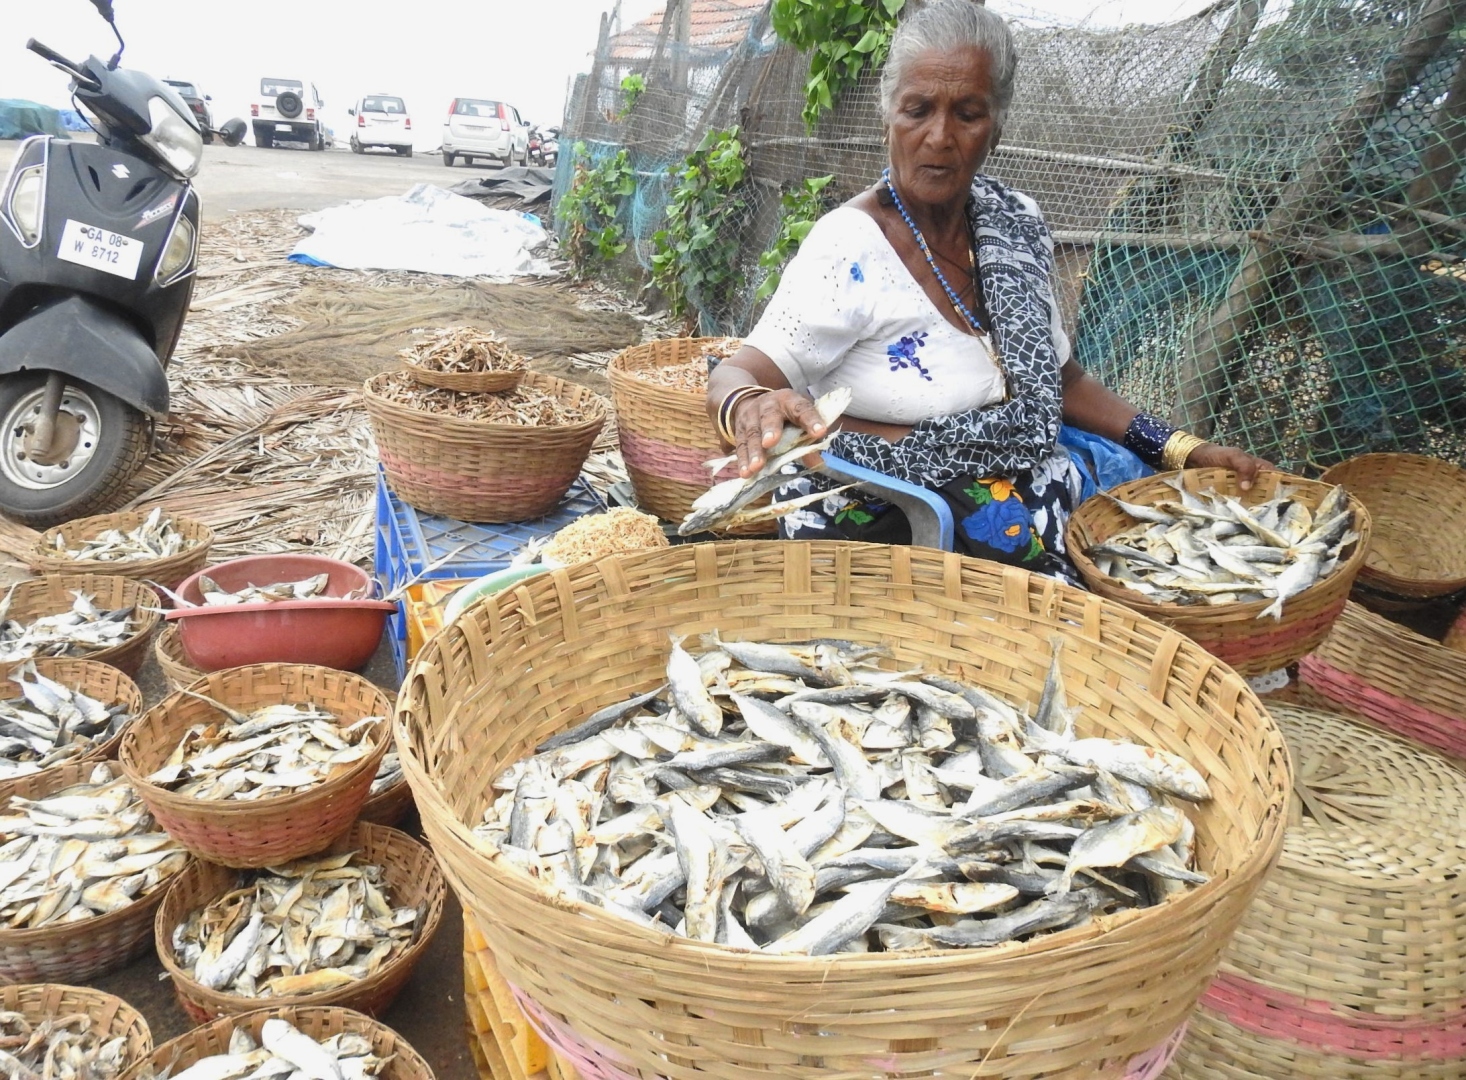 The Goan EveryDay: With monsoons ahead, fish vendors brace for big sales